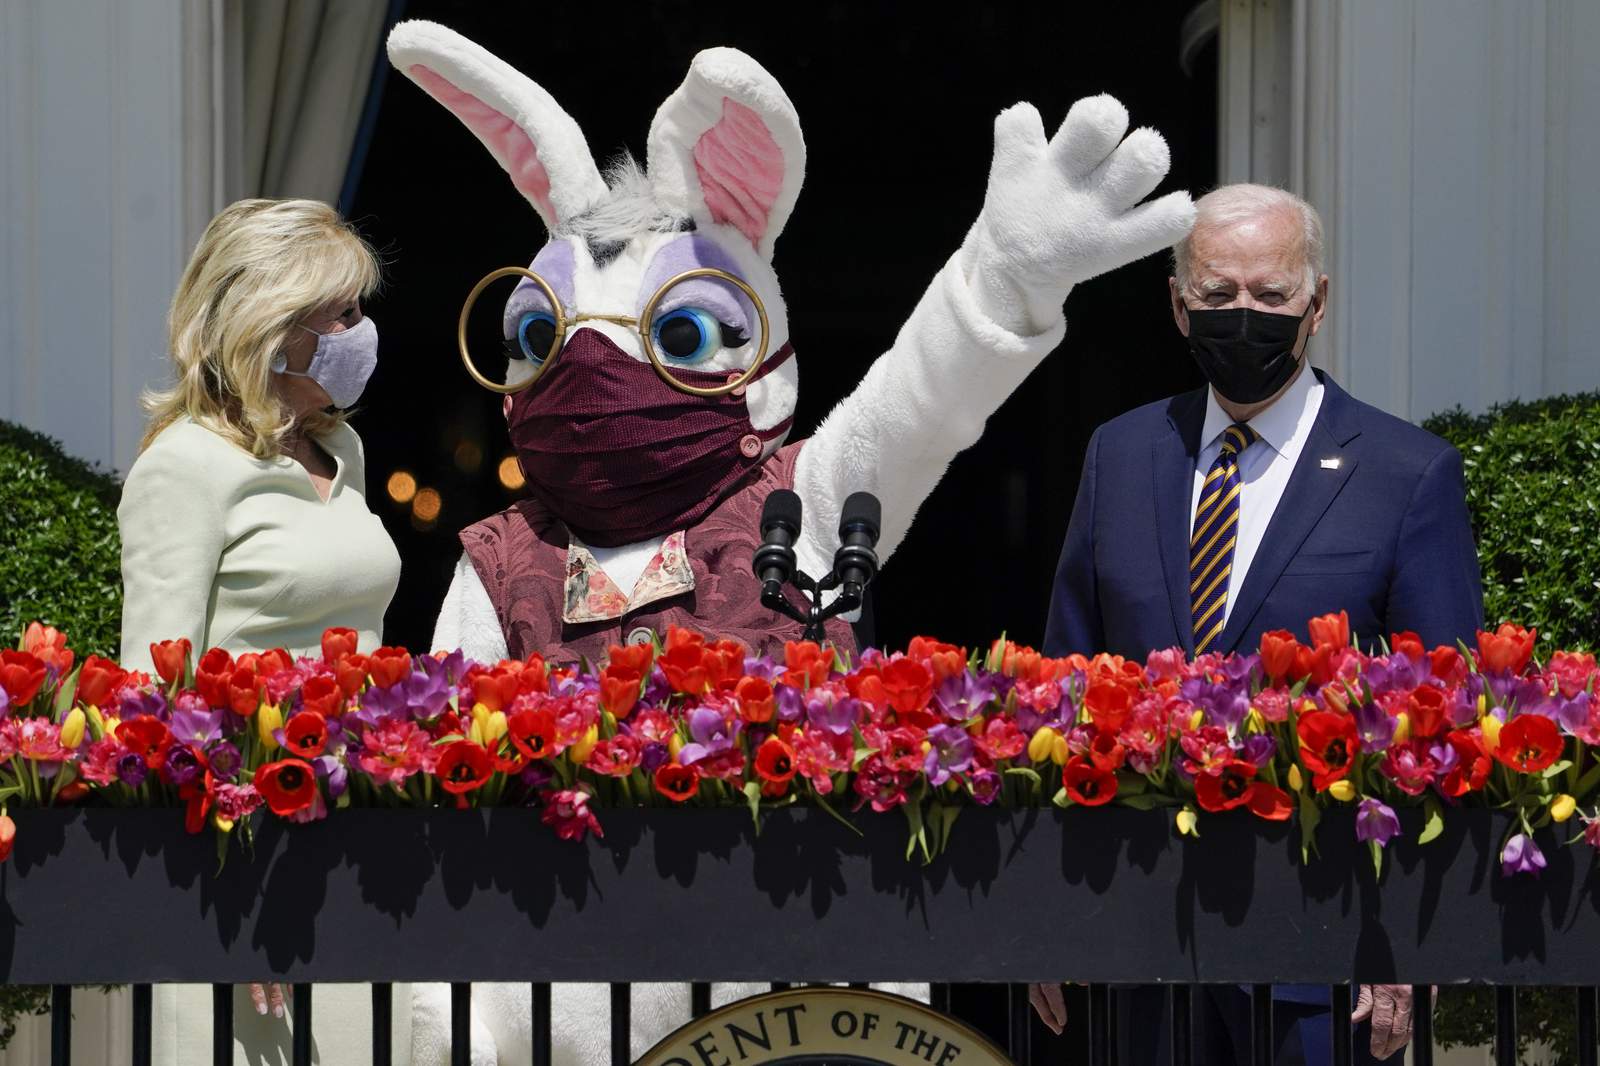 No egg roll again, but Easter Bunny still visits White House